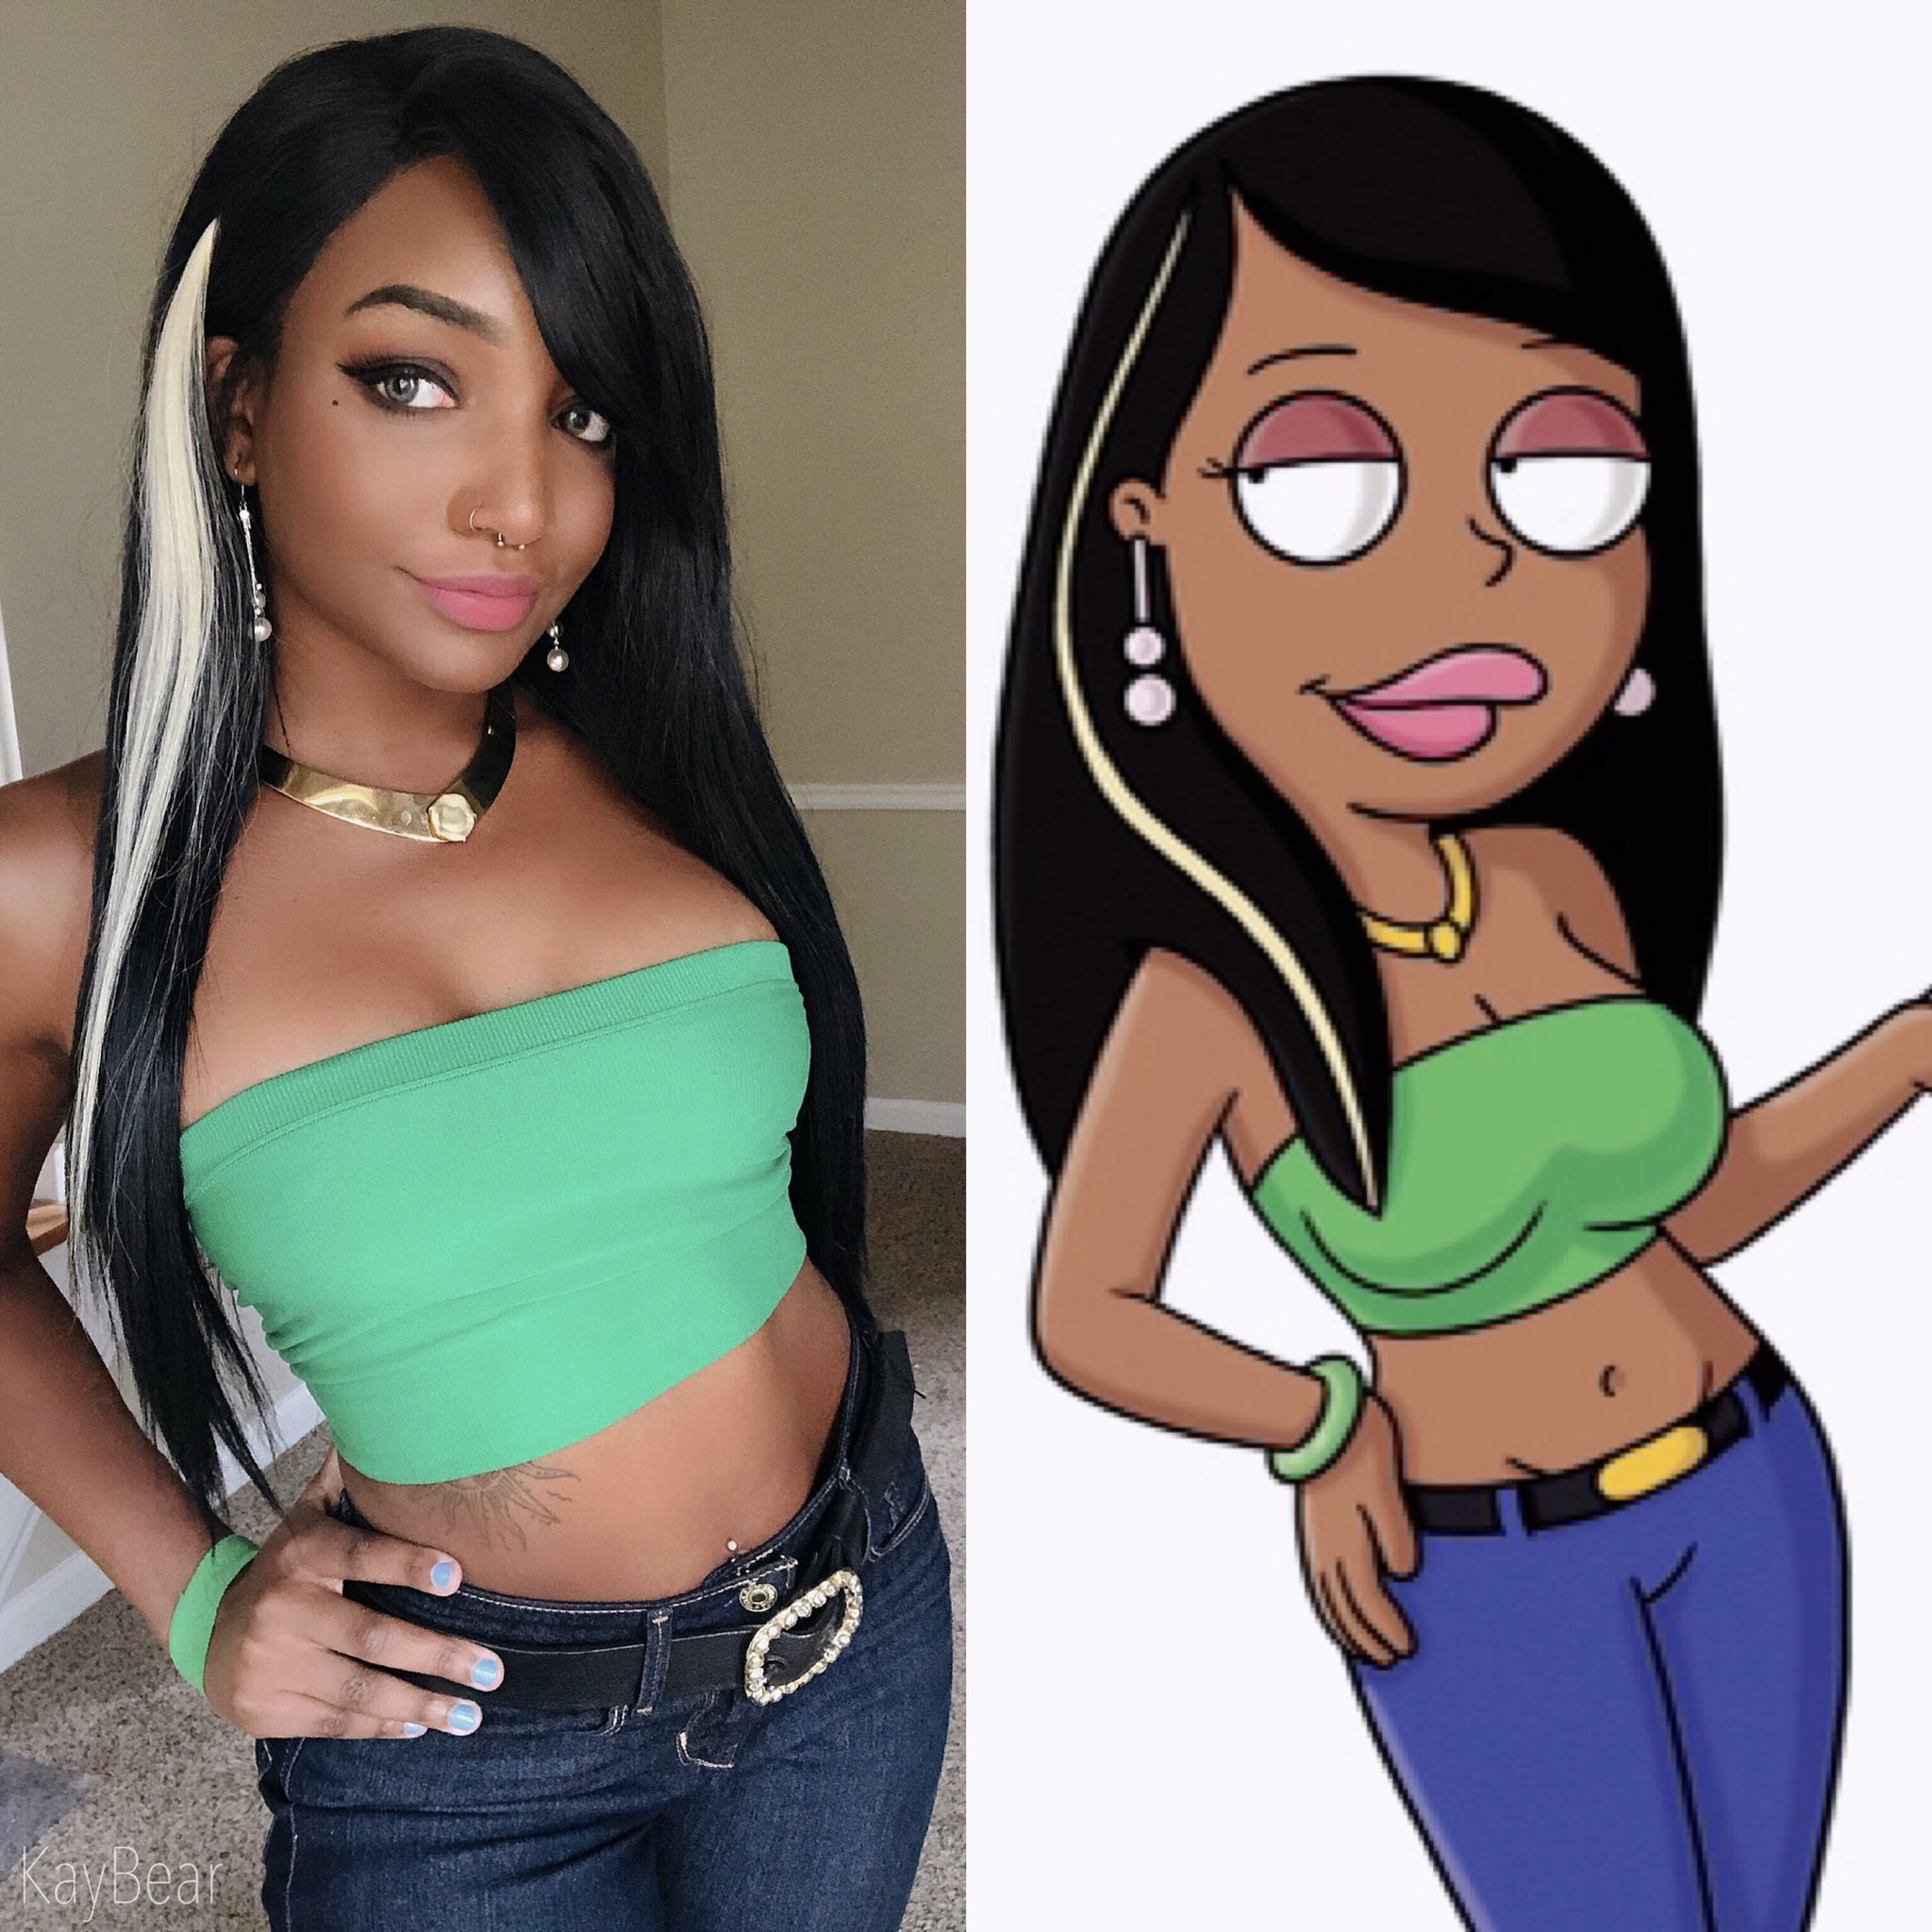 “Roberta Tubbs from The Cleveland Show 💚” .